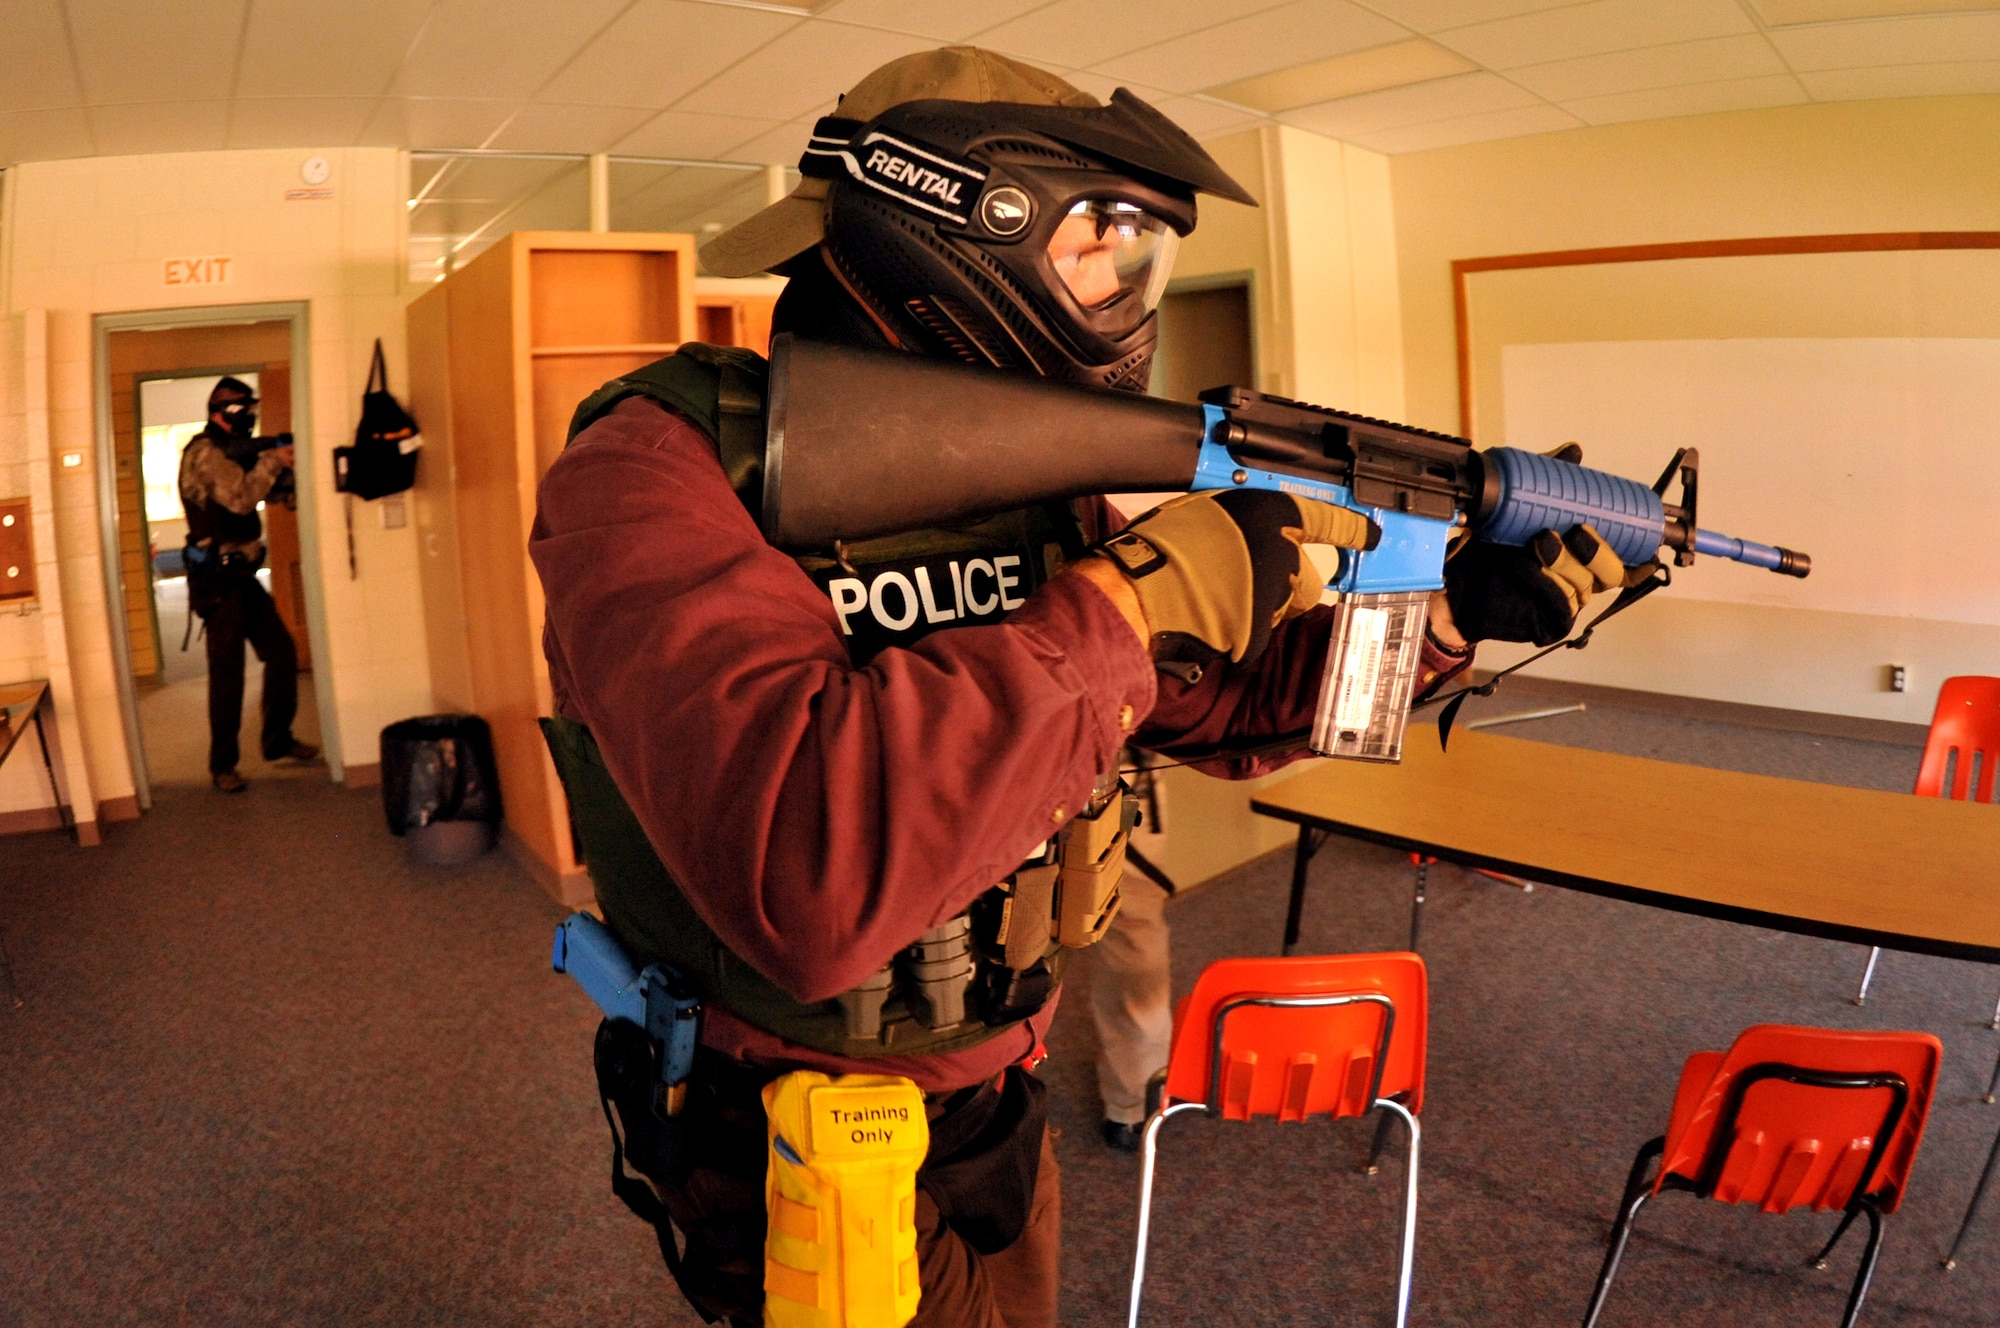 Police officers practice room clearing procedures during a training scenario Sept. 3, 2015 at Carl Ben Eielson Elementary School on Grand Forks Air Force Base, North Dakota. Nearly two dozen law enforcement officers from various agencies across the region came together here during the first week of September 2015 for some classroom and hands-on training dealing with a variety of active shooter scenarios. (U.S. Air Force photo/Staff Sgt. Susan L. Davis)